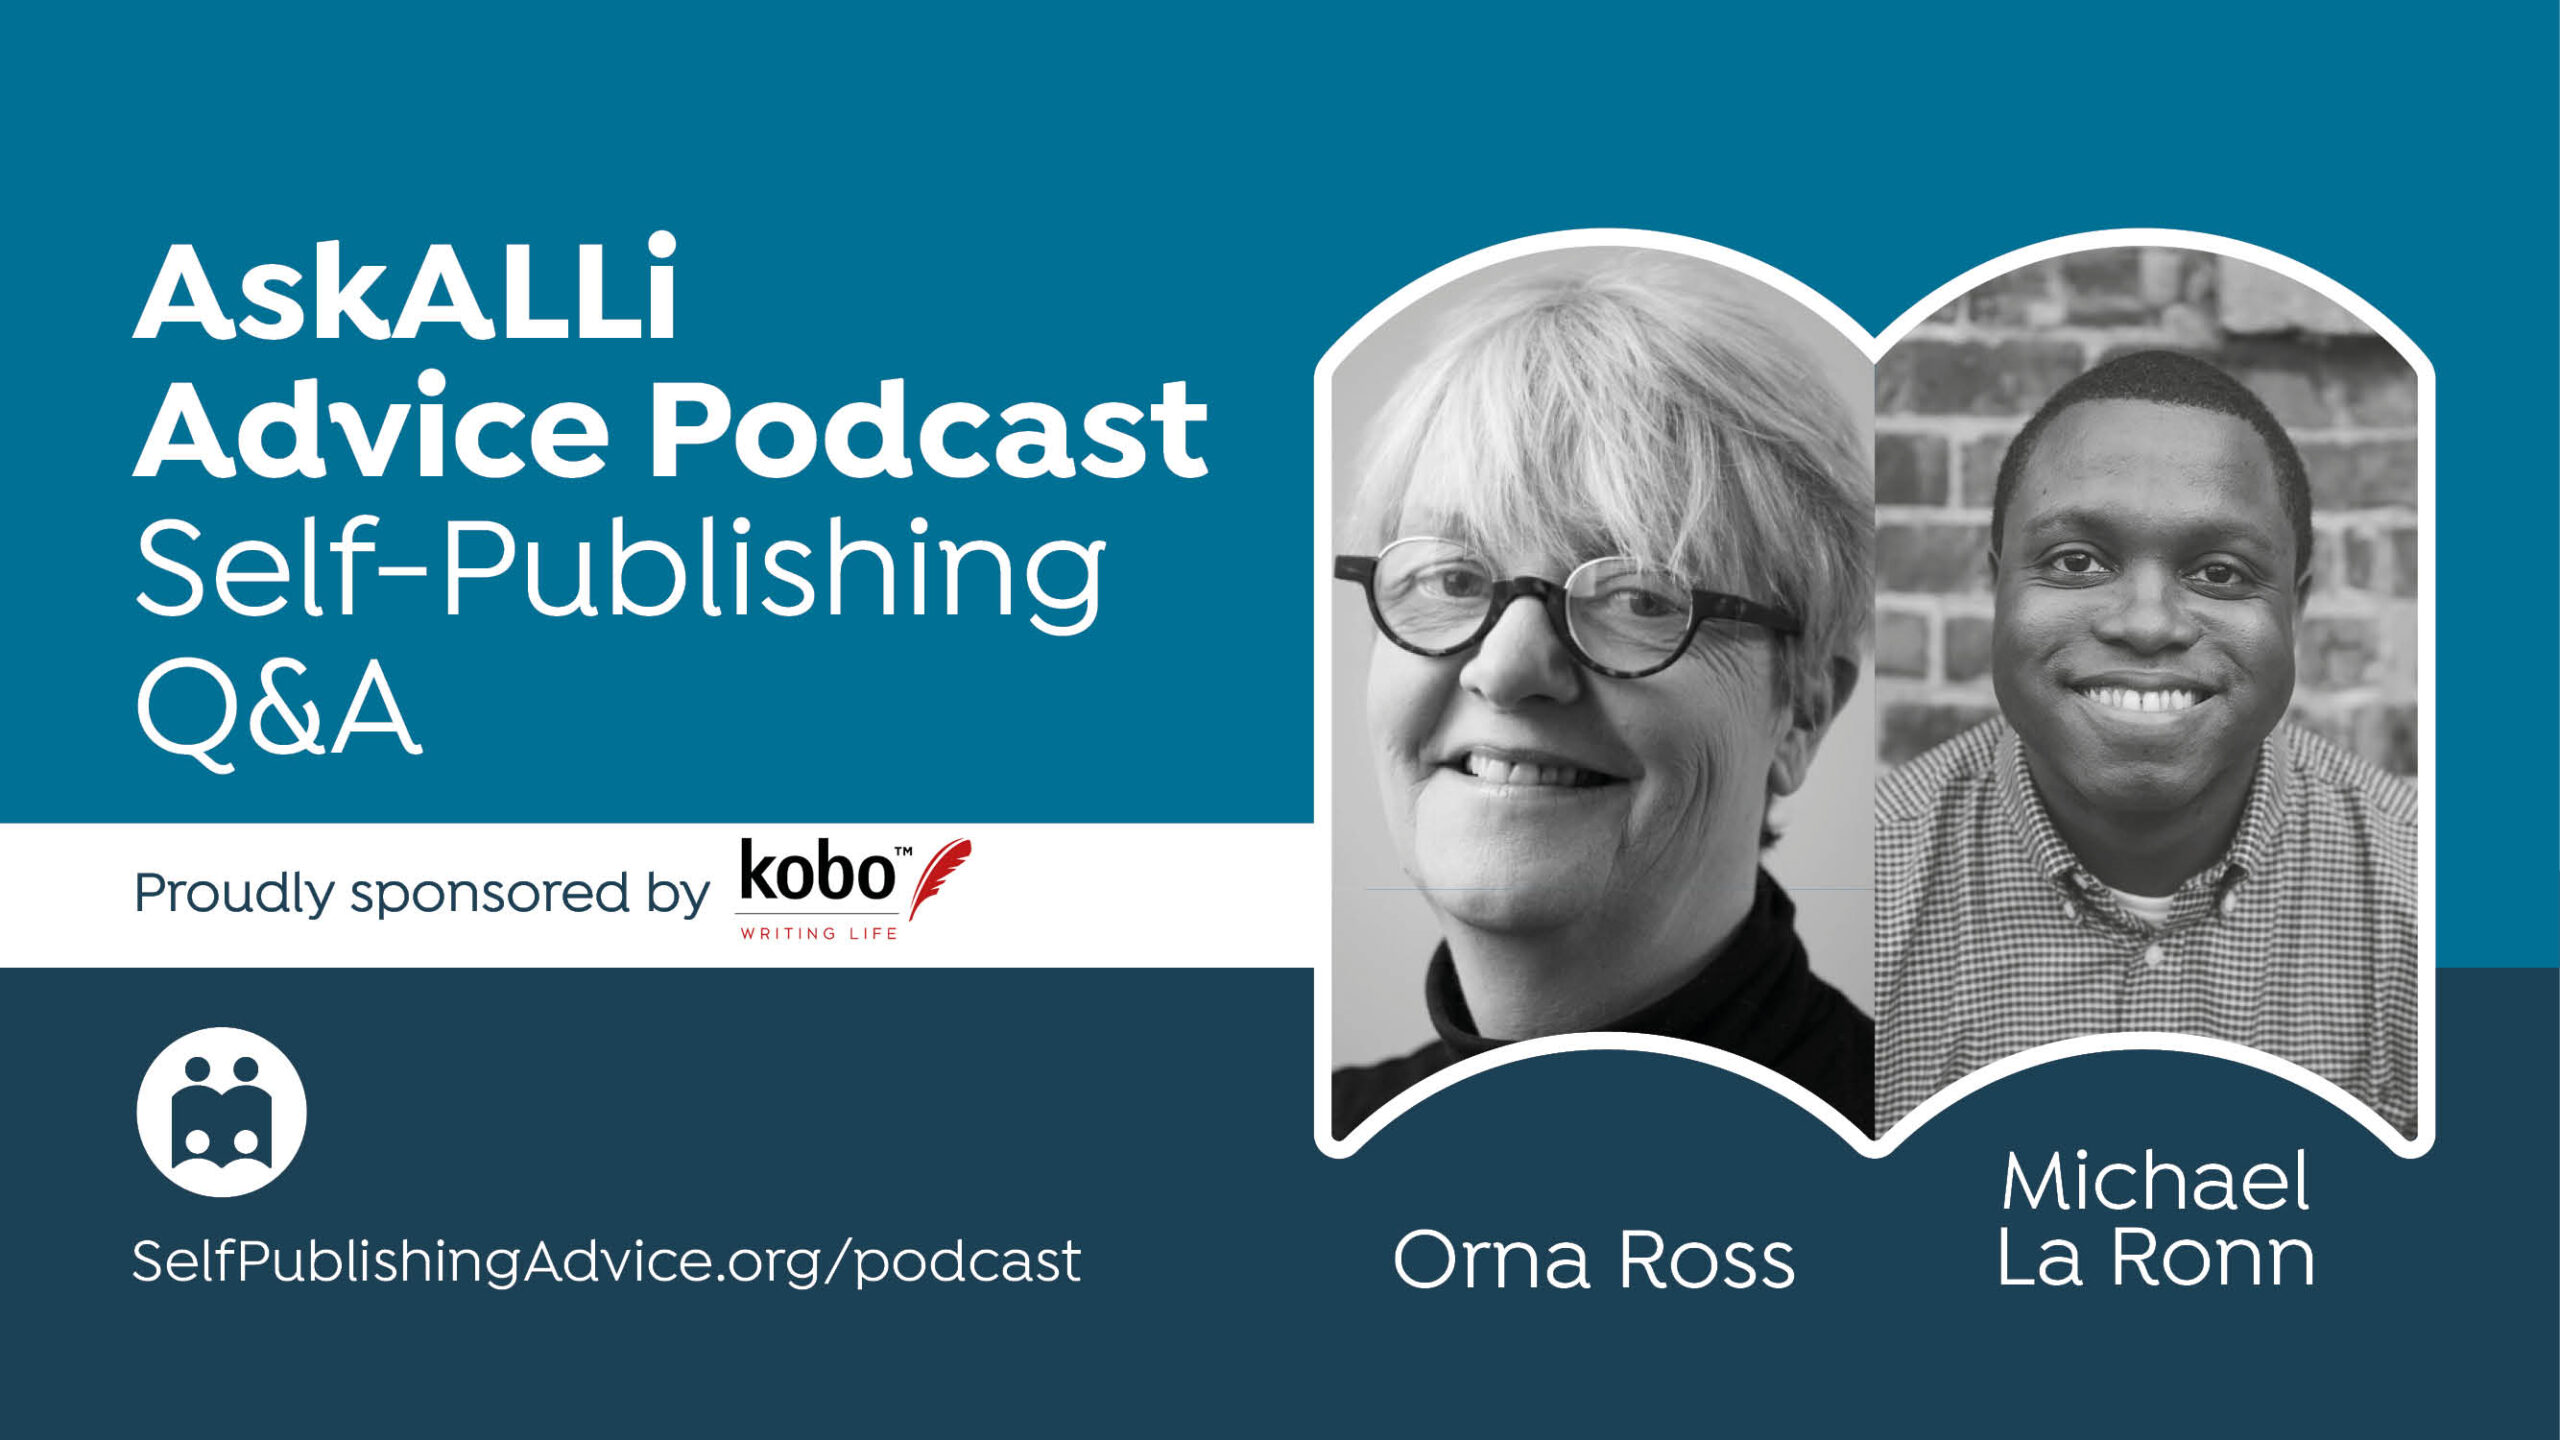 PODCAST: What Are The First Steps For A New Author & Other Questions Answered In Our Member Q&A